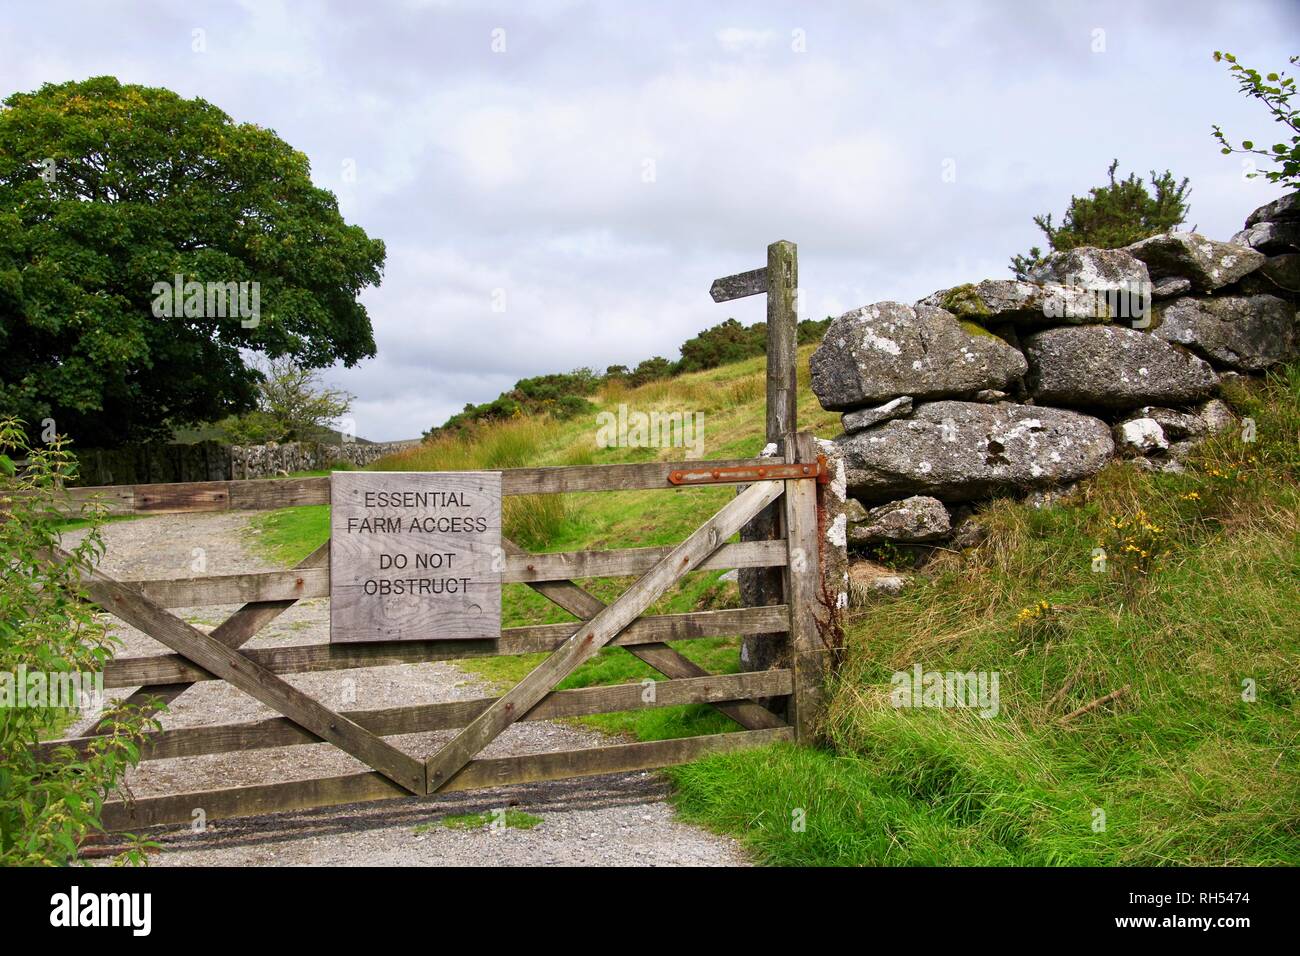 Wooden Farm Gate and Drystone Wall at Wistmans Wood Car Park. Dartmoor National Park, Devon, UK. Stock Photo